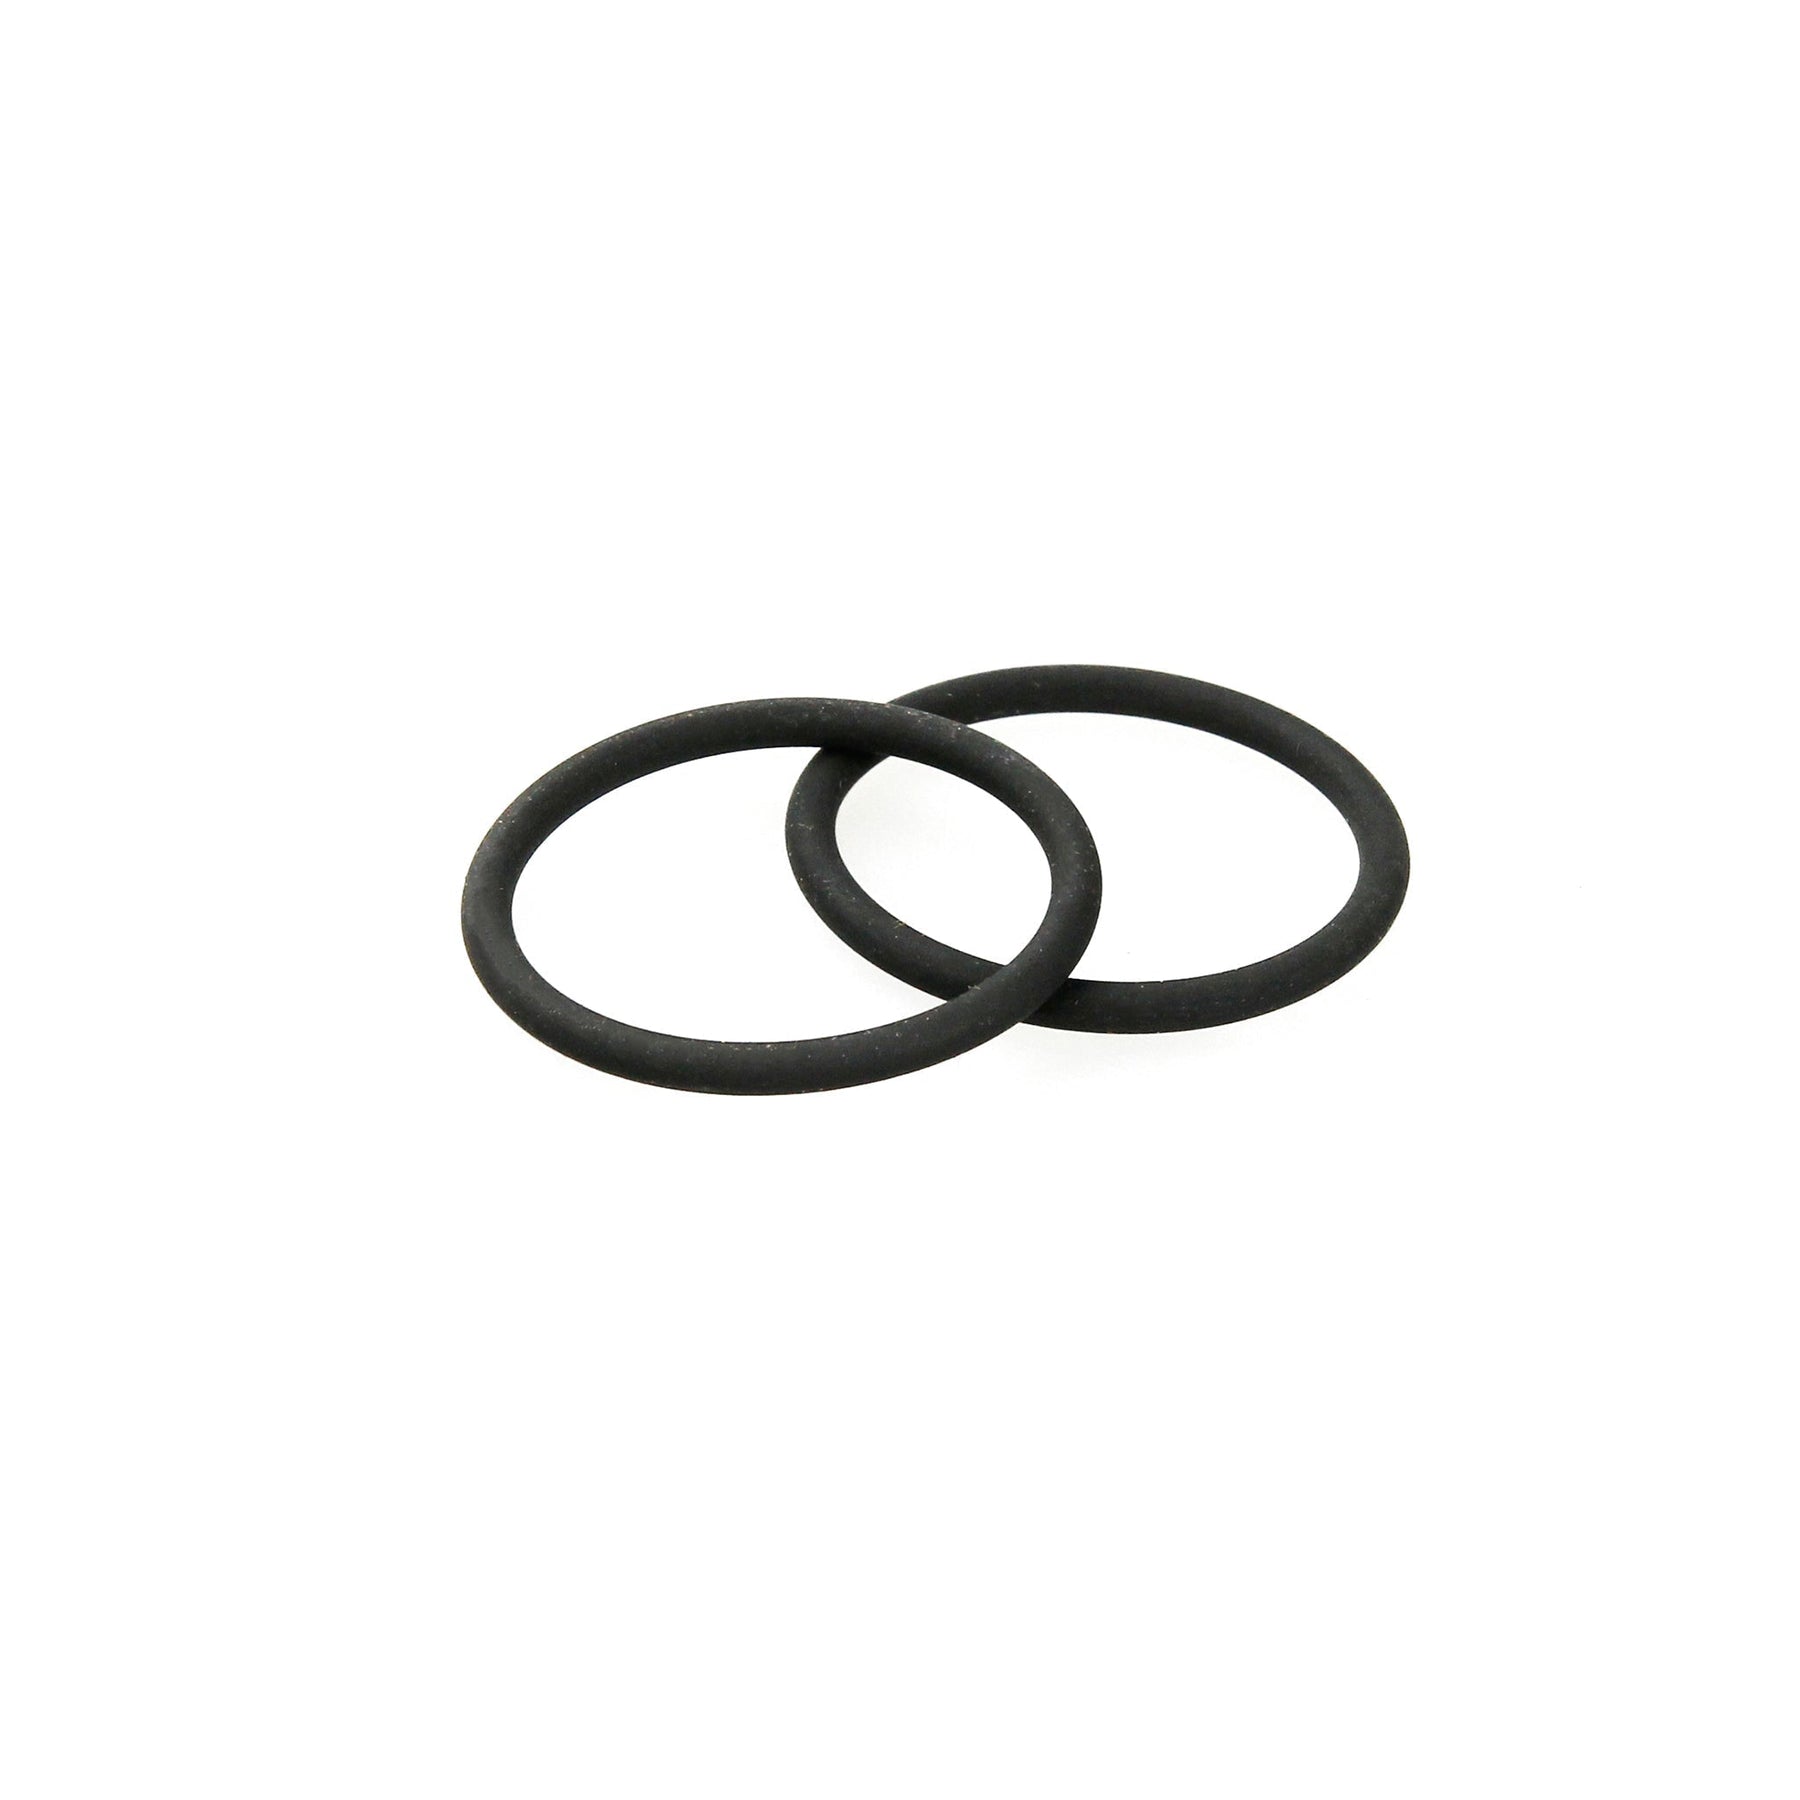 Replacement O-ring, MSR